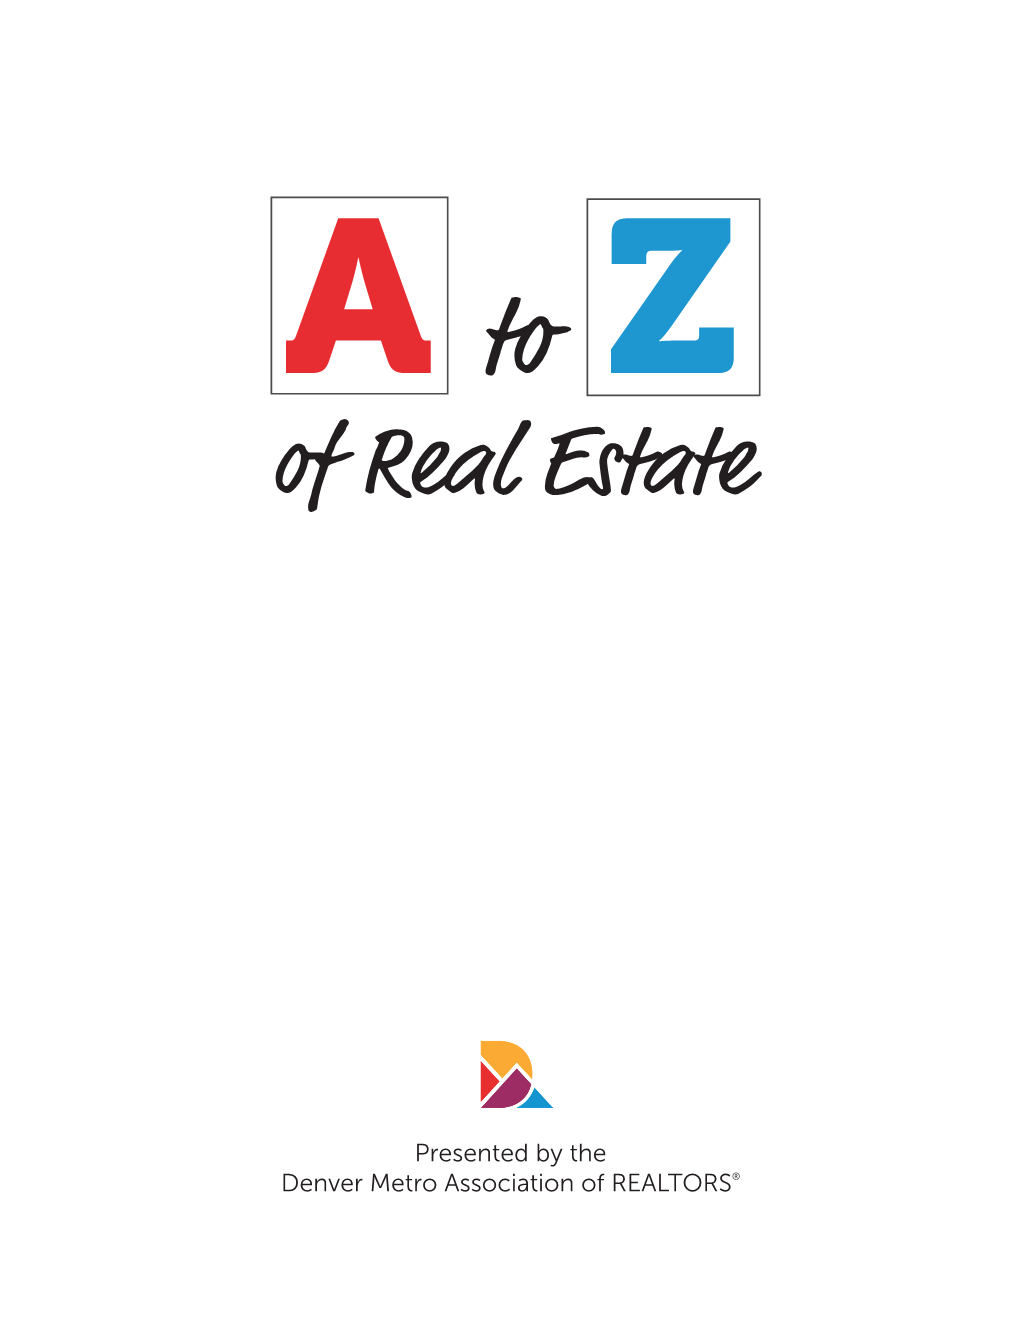 Of Real Estate